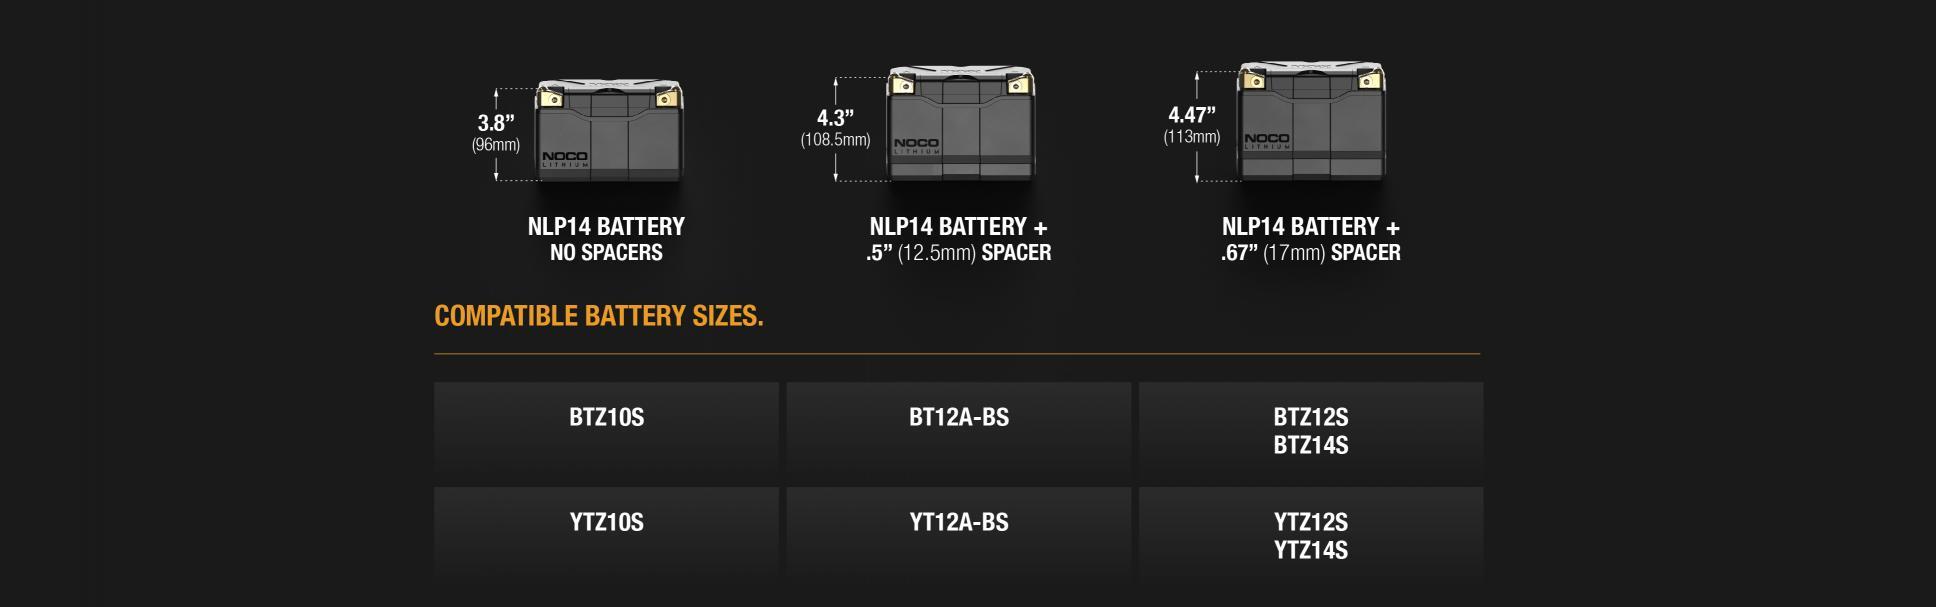 NLP14-Adjustable-Sizing-Fitment-Chart-Compatible-BCI-Battery-Sizes-Modular-Spacers_2